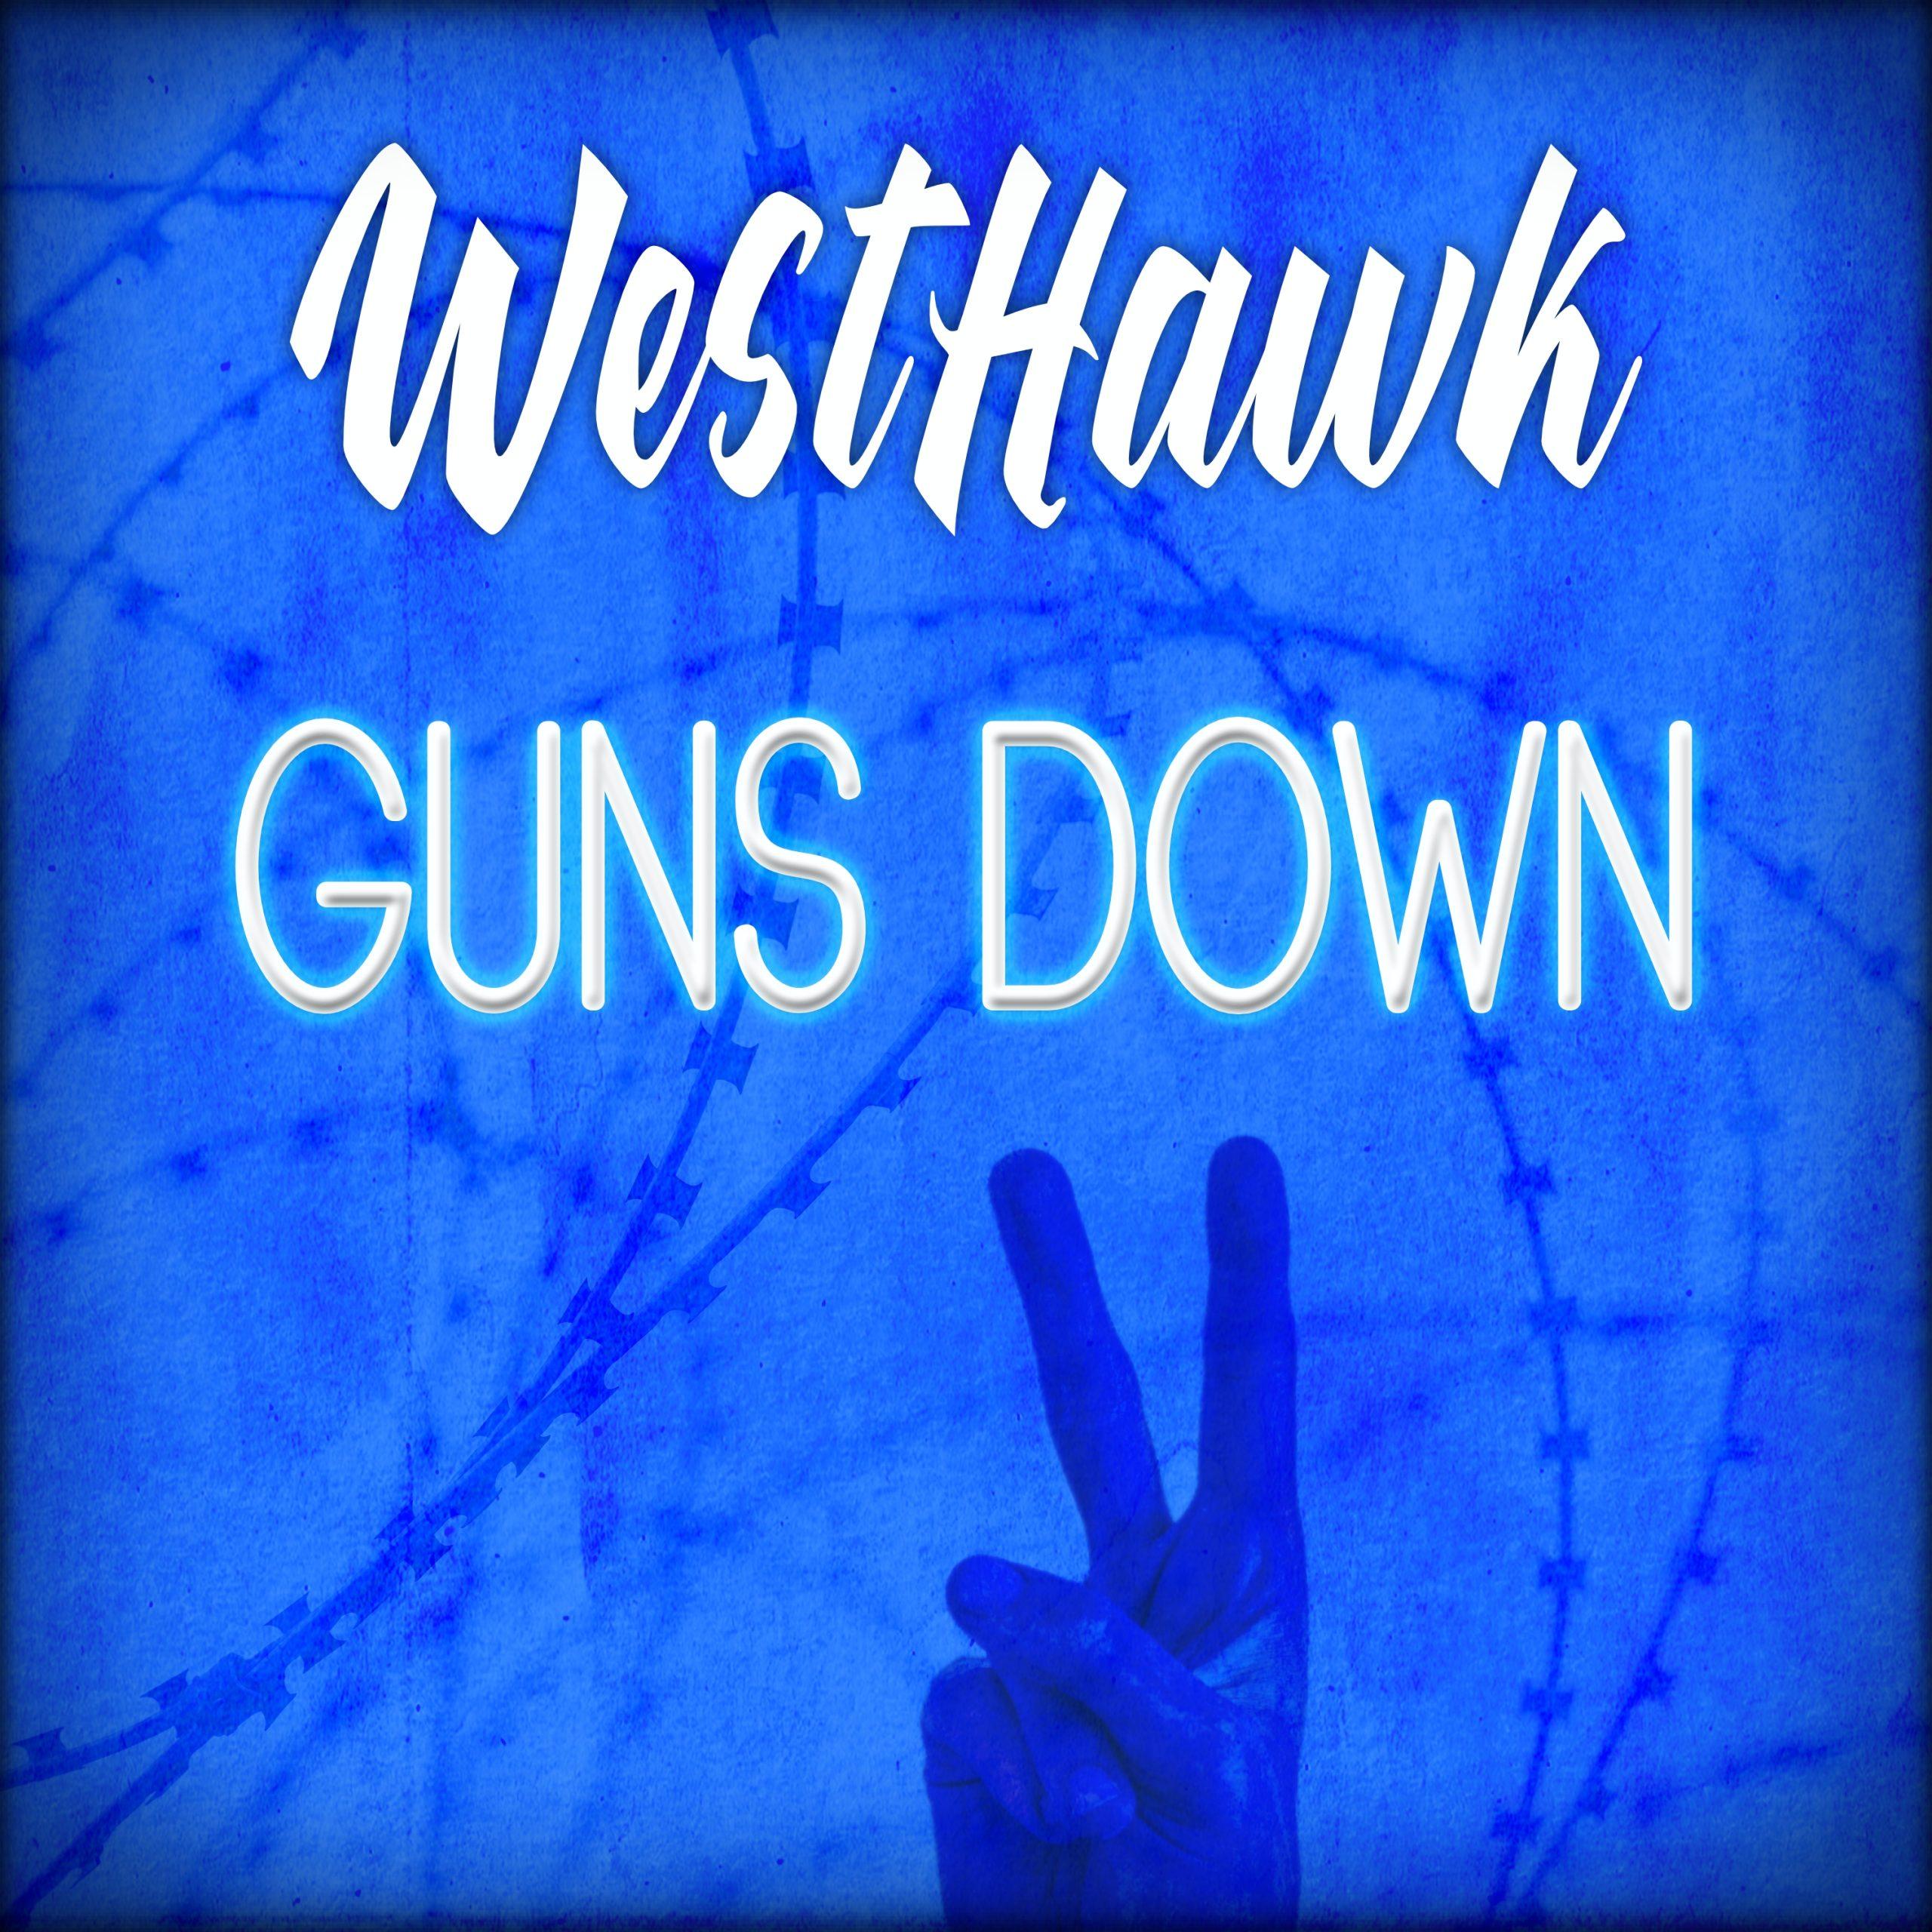 good song by WestHawk